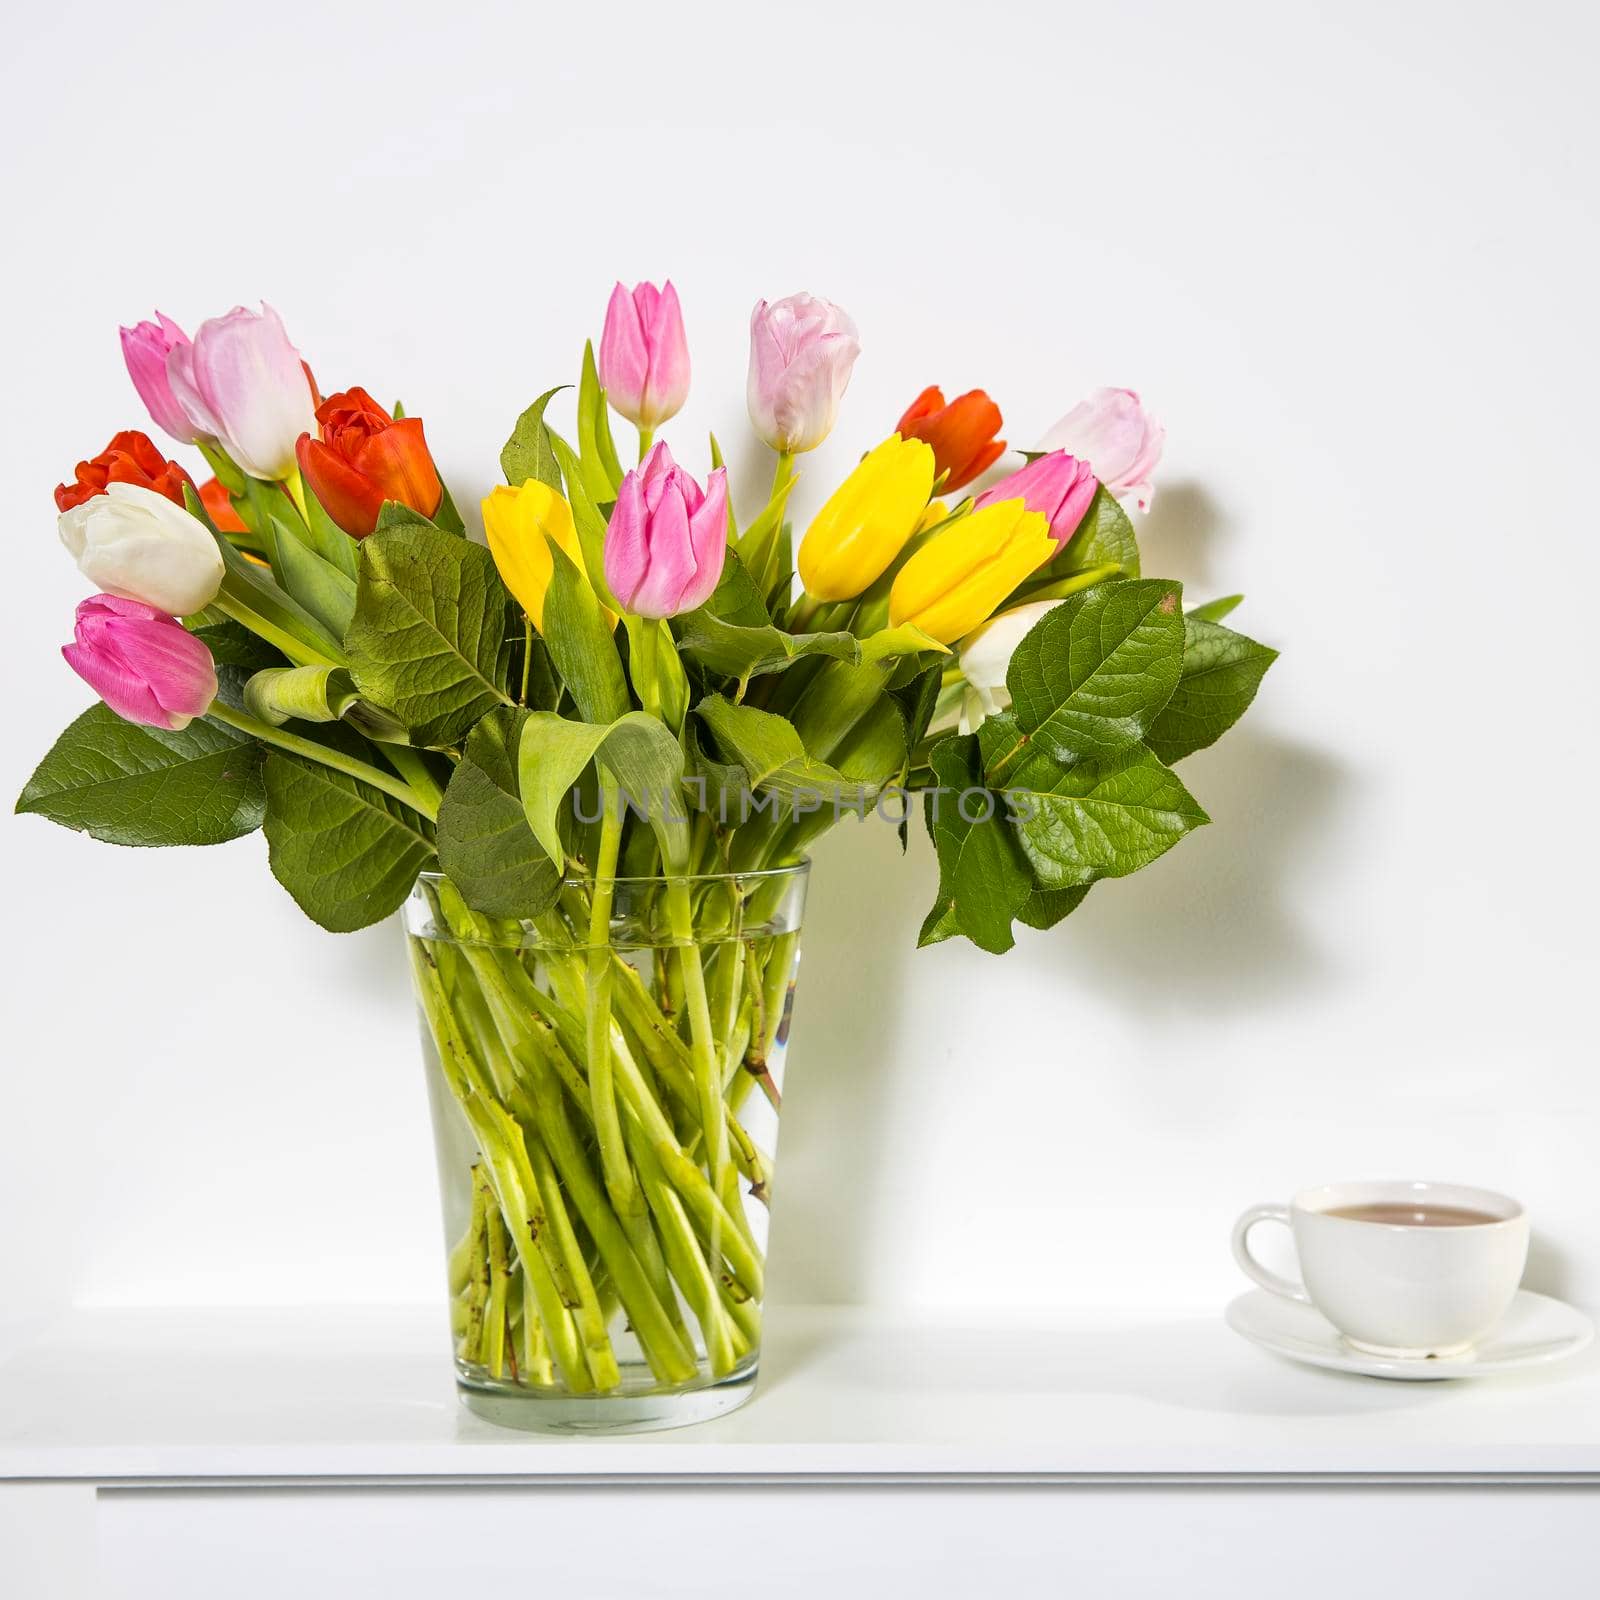 A bouquet of multi-colored tulips in a transparent vase and cup of tea on the white window.